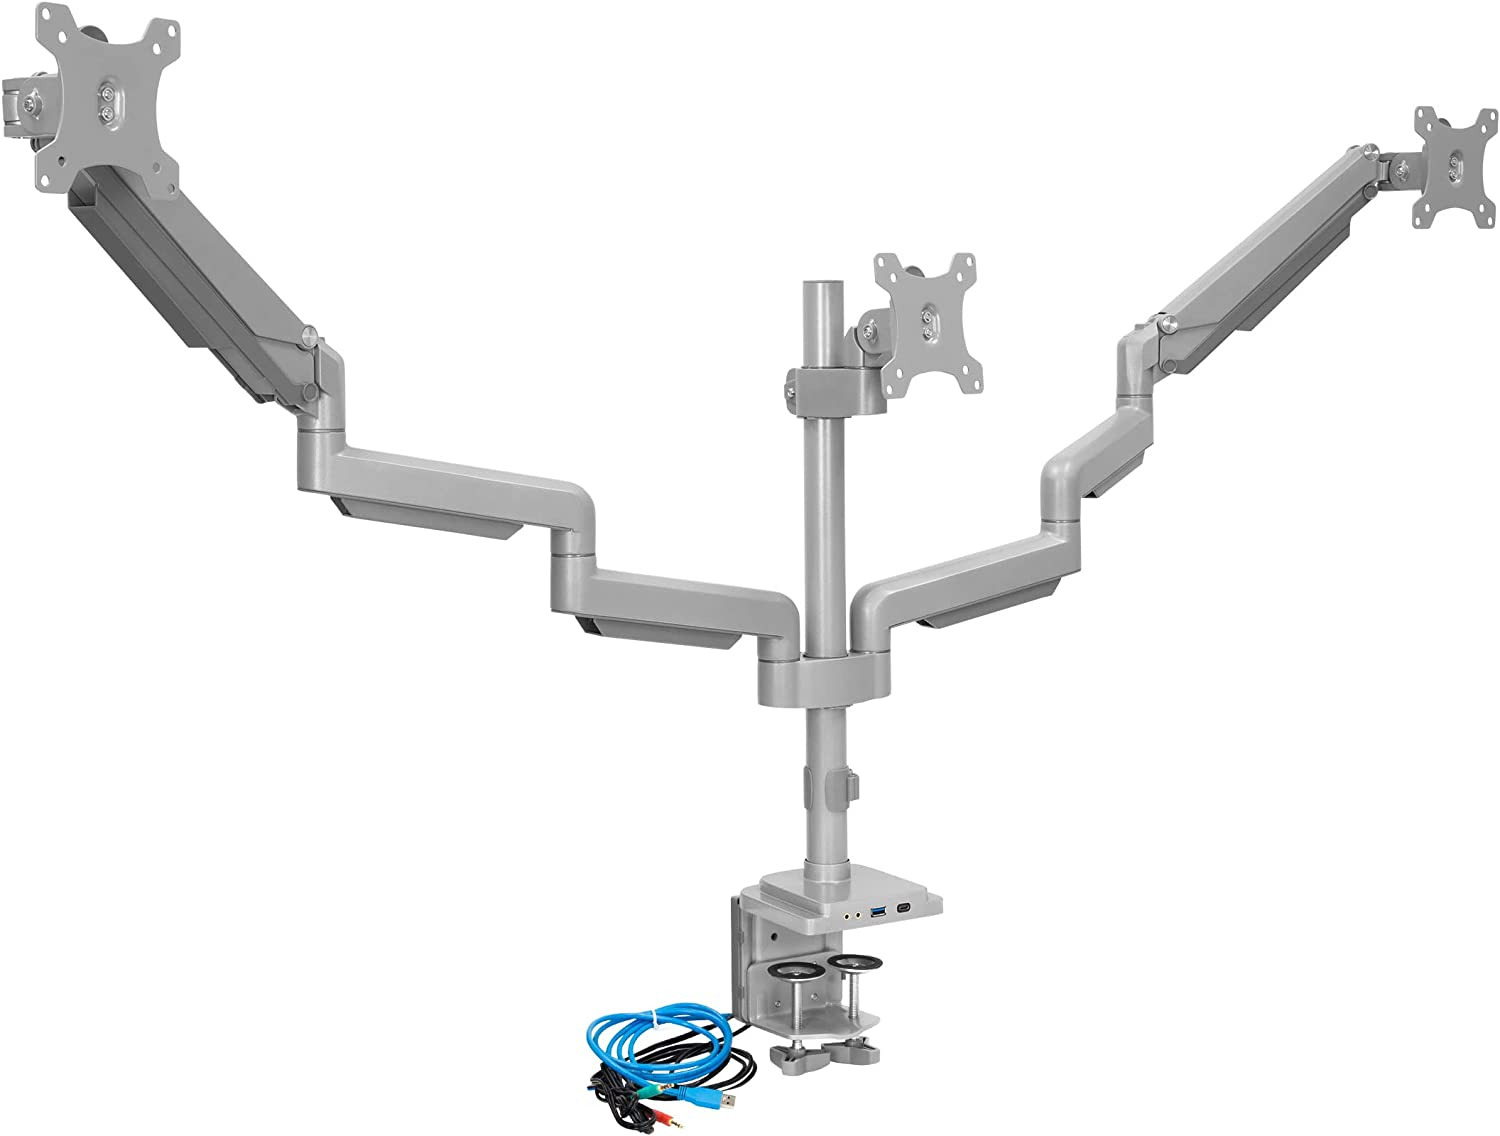 Mount-It Triple Monitor Mount | Desk Stand with USB and Audio Ports 3 Counter